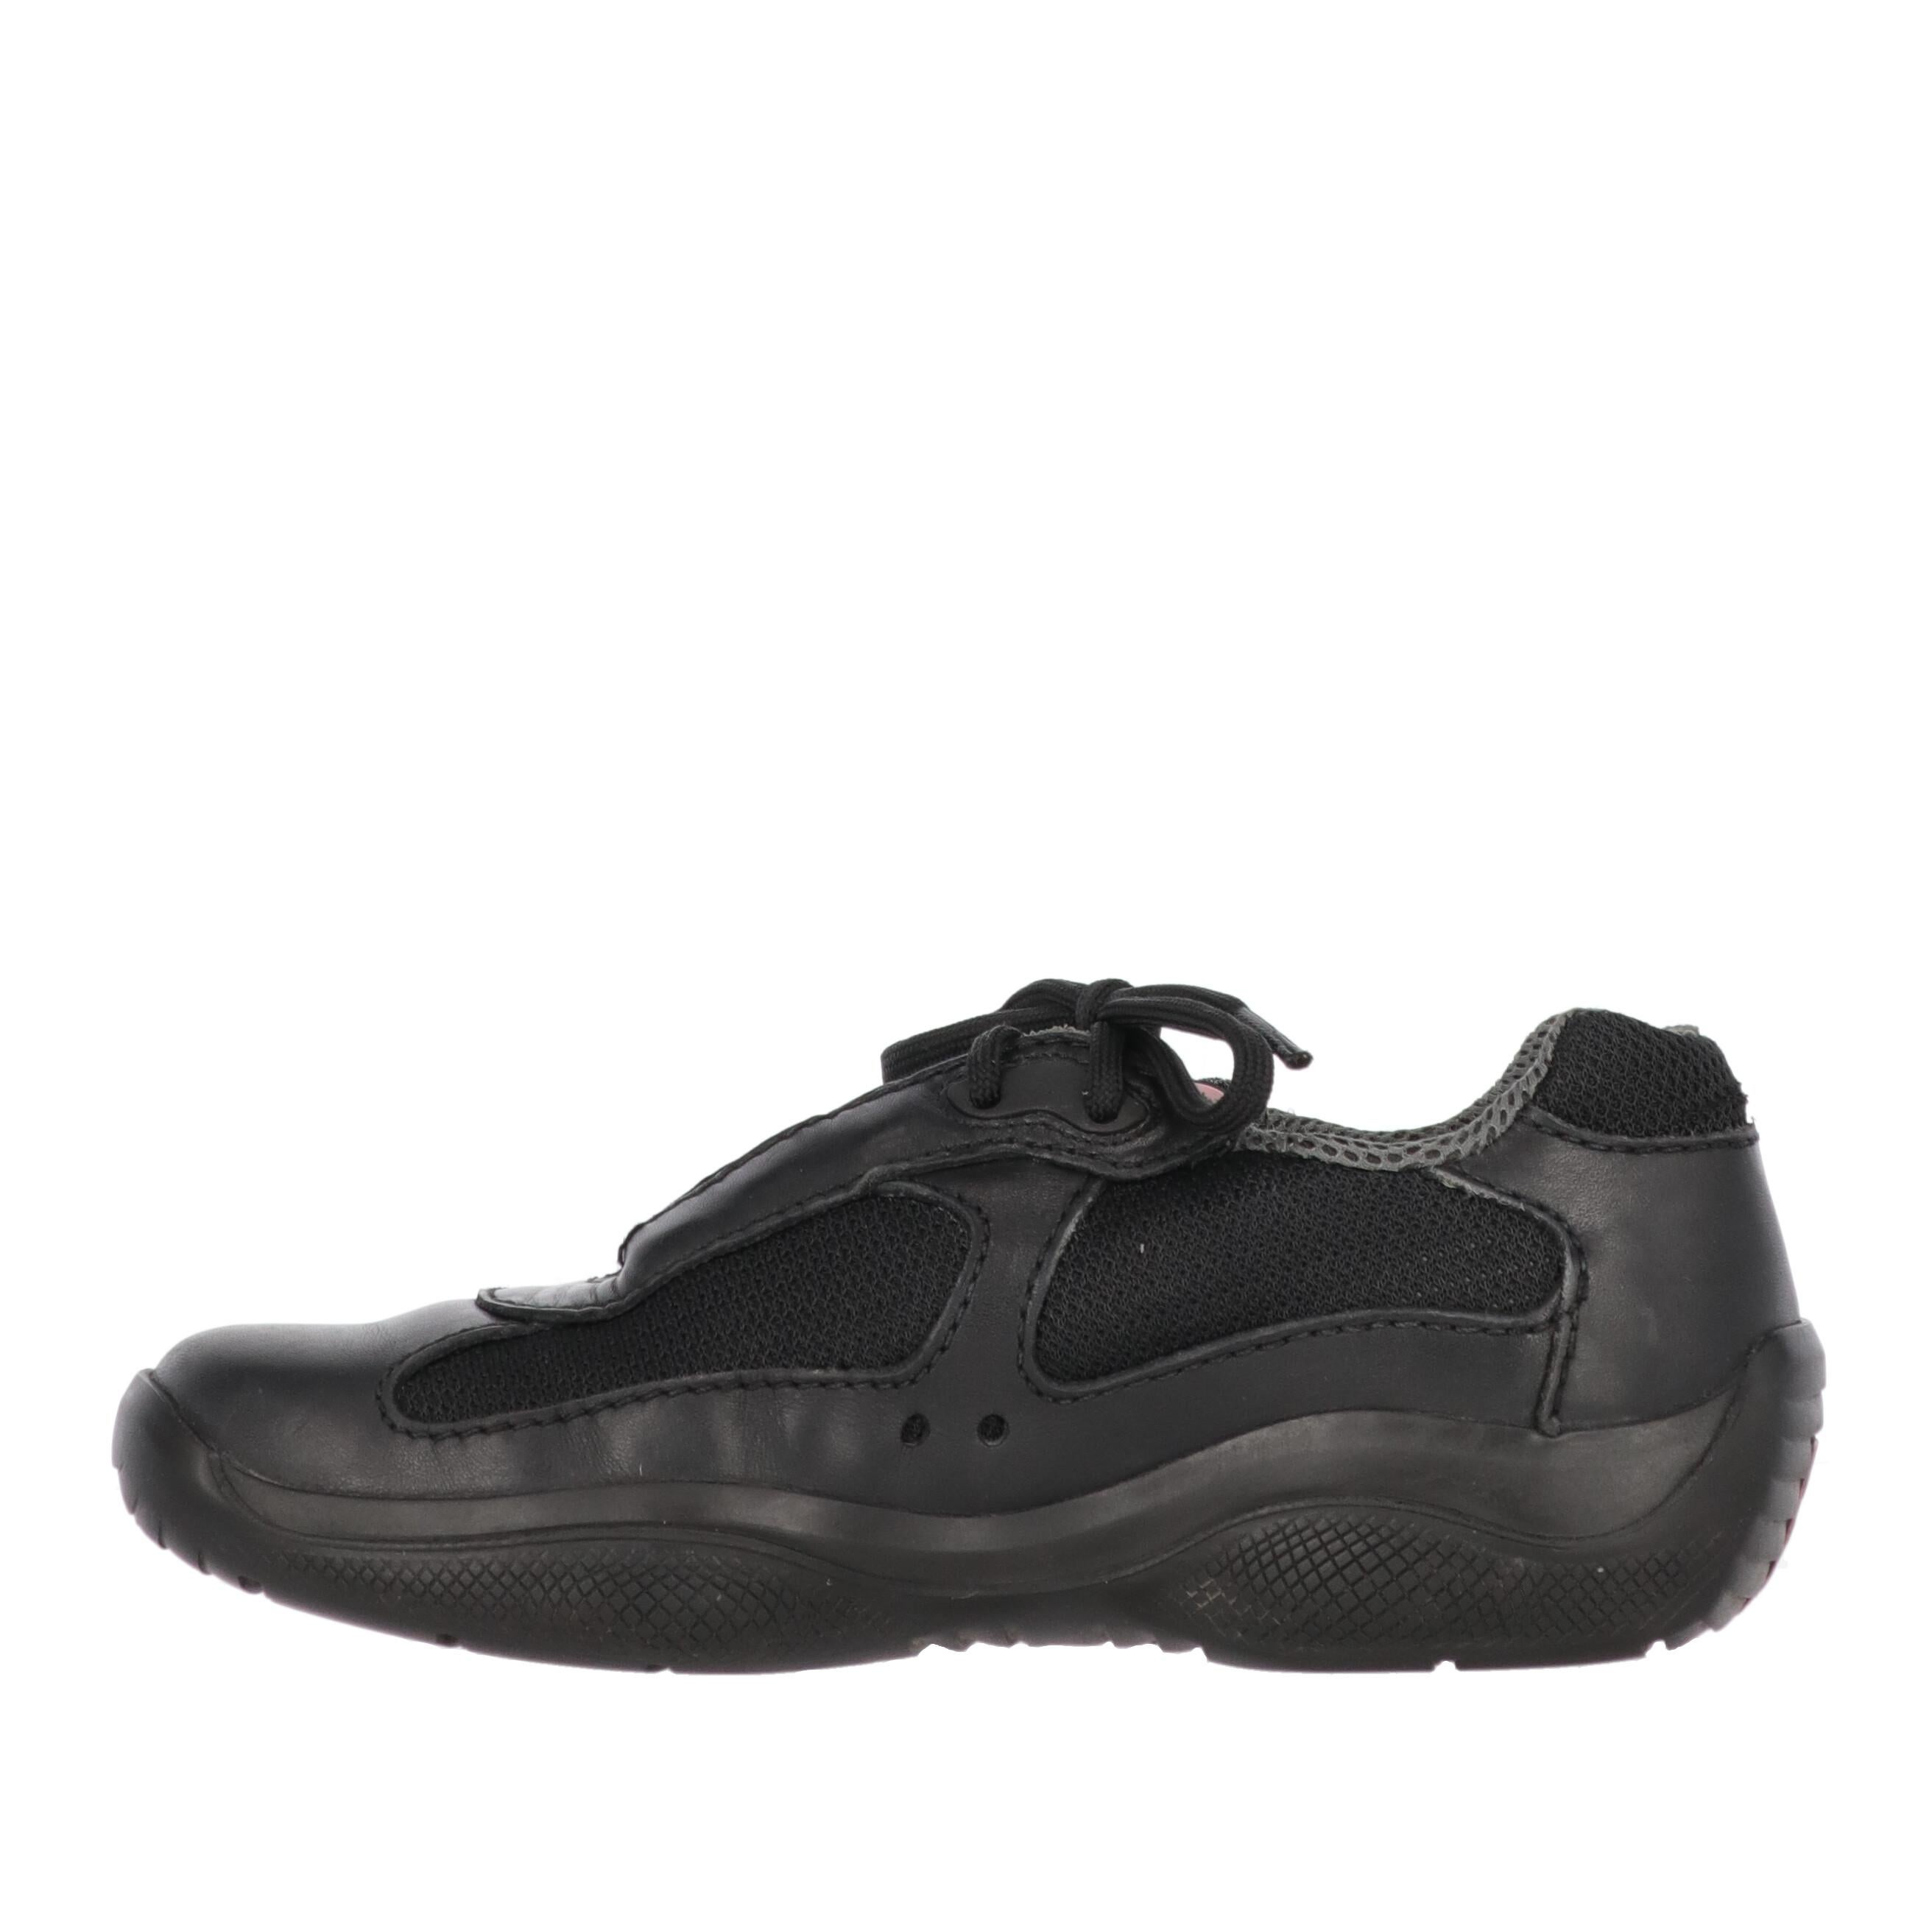 Prada black technical fabric and leather lace-up shoes, square toe, black rubber sole with Prada Linea Rossa logo. 
The shoes show light signs of wear on the leather, as shown in the pictures. 

Years: 90s
Size: 37½ EU
Insole: 24 cm